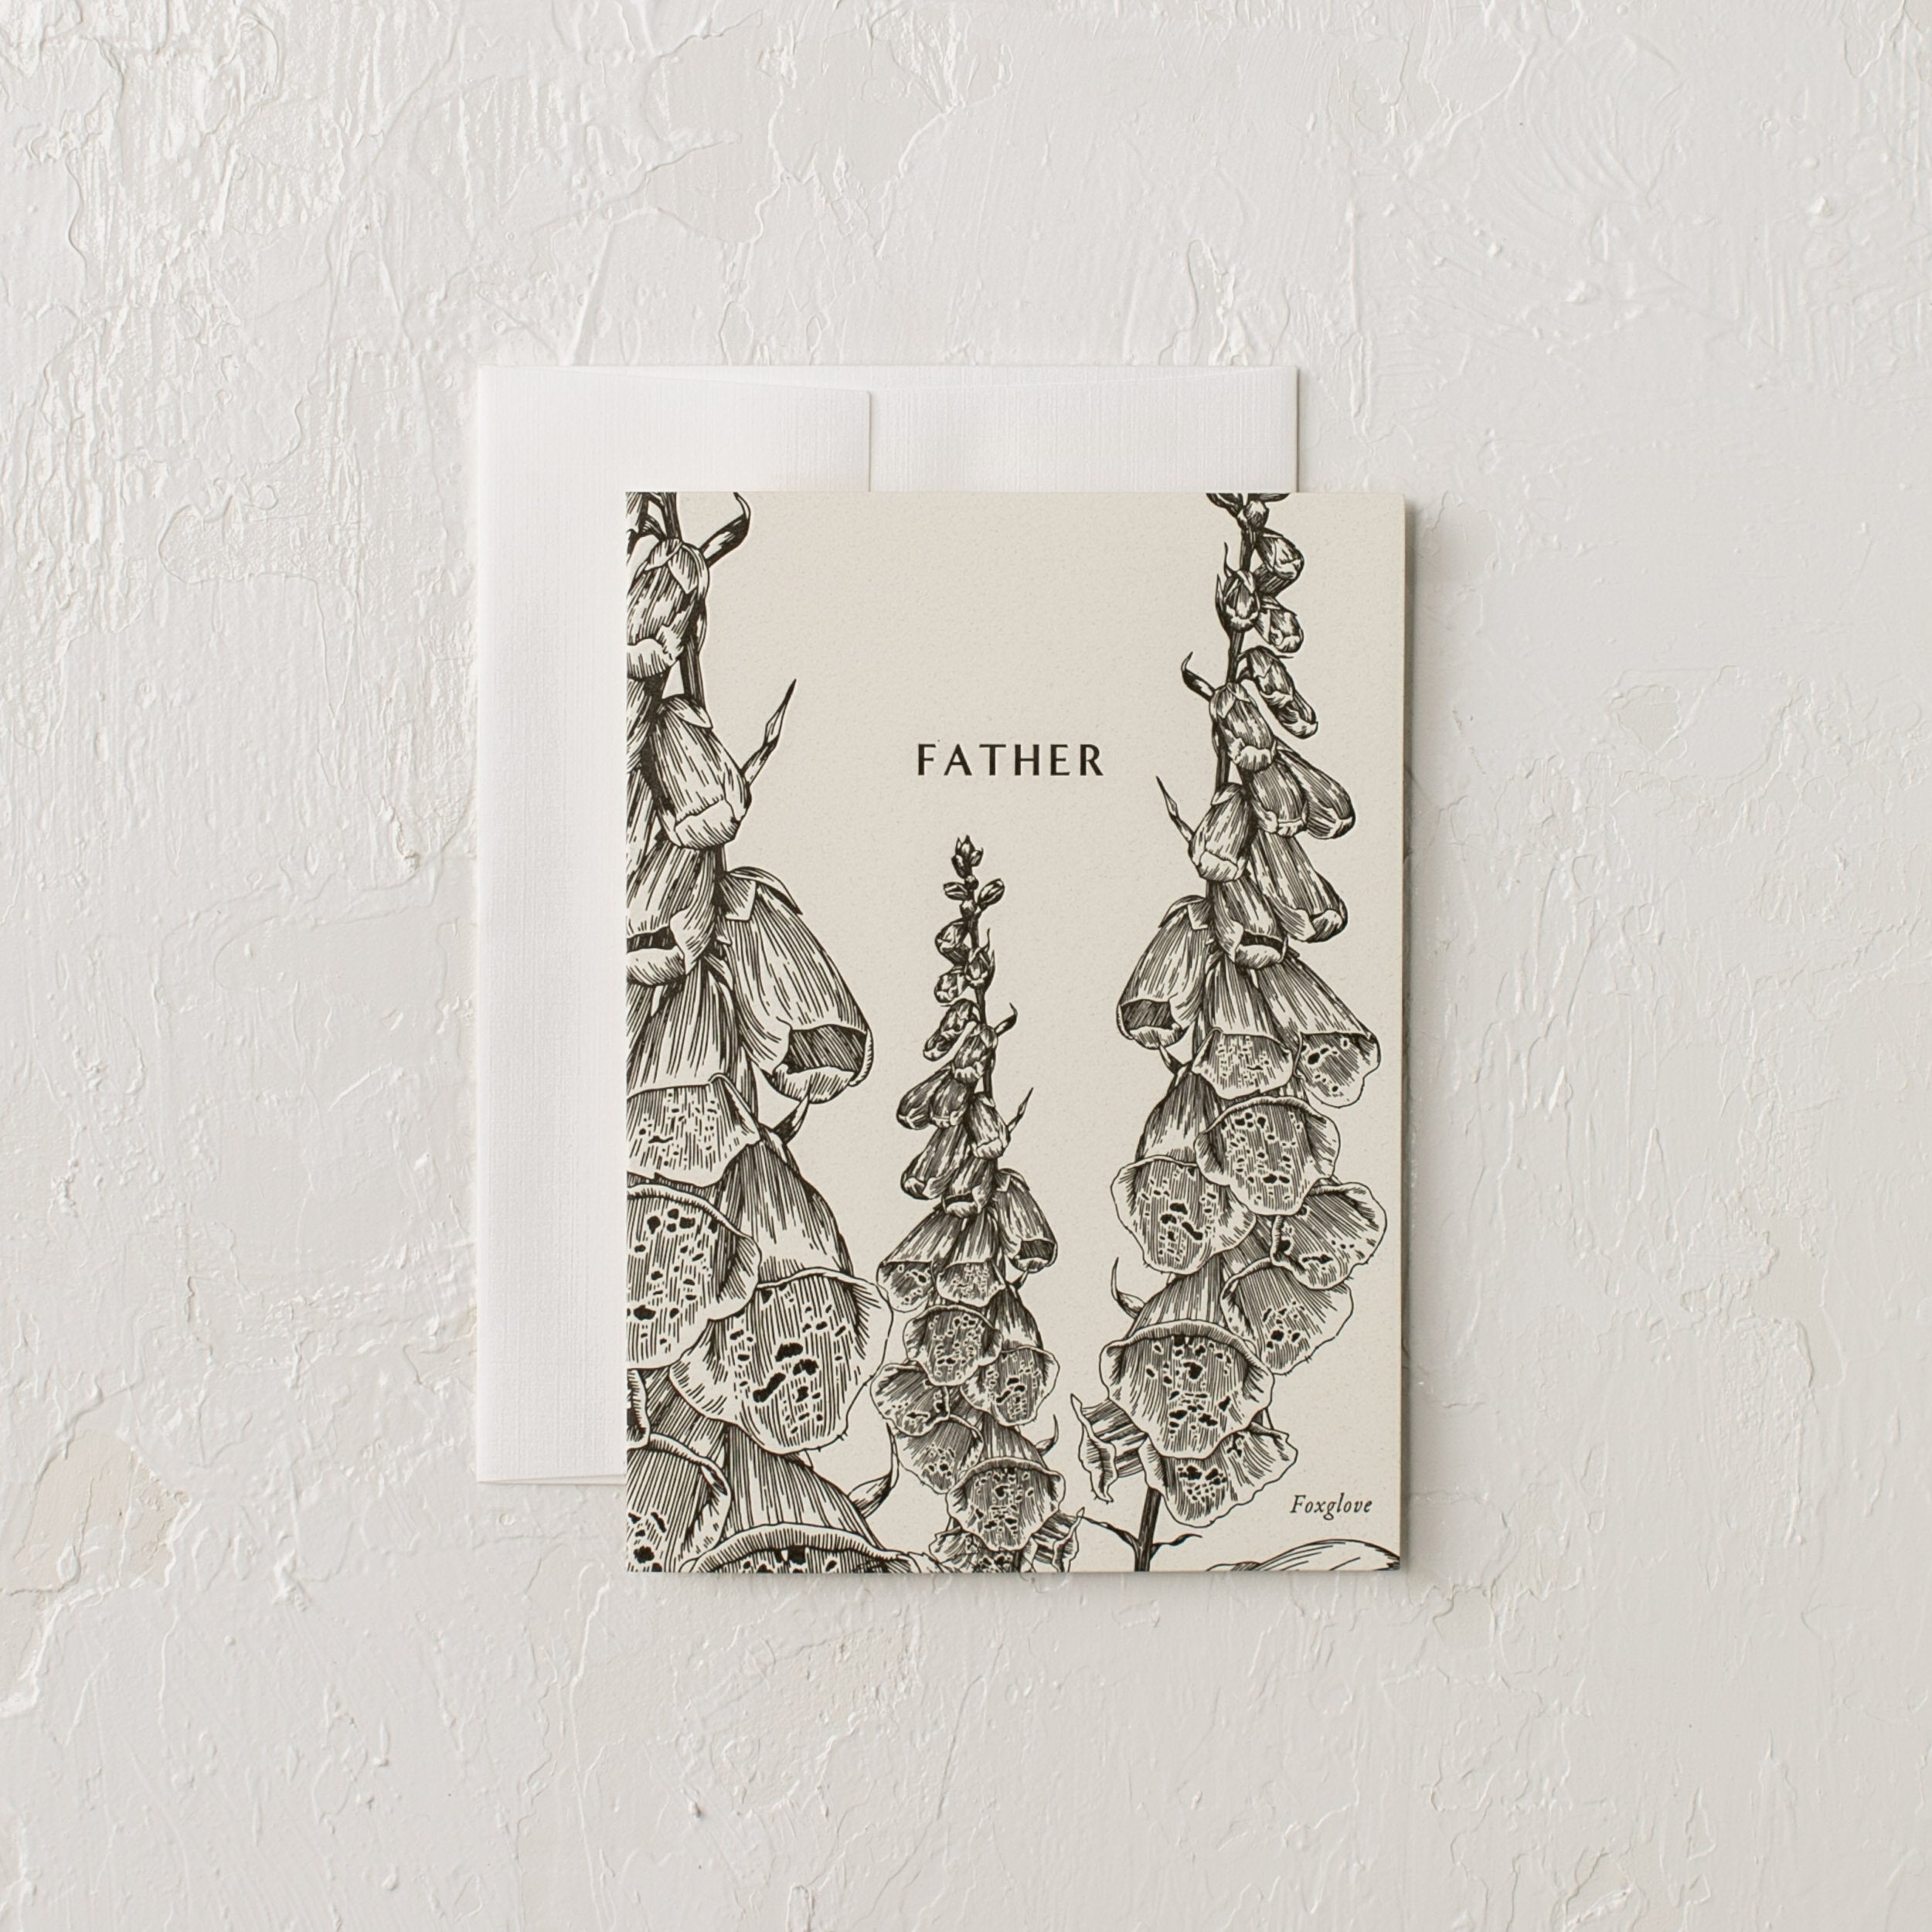 Letter-pressed botanical greeting card. Fox glove illustration labeled "Father" 